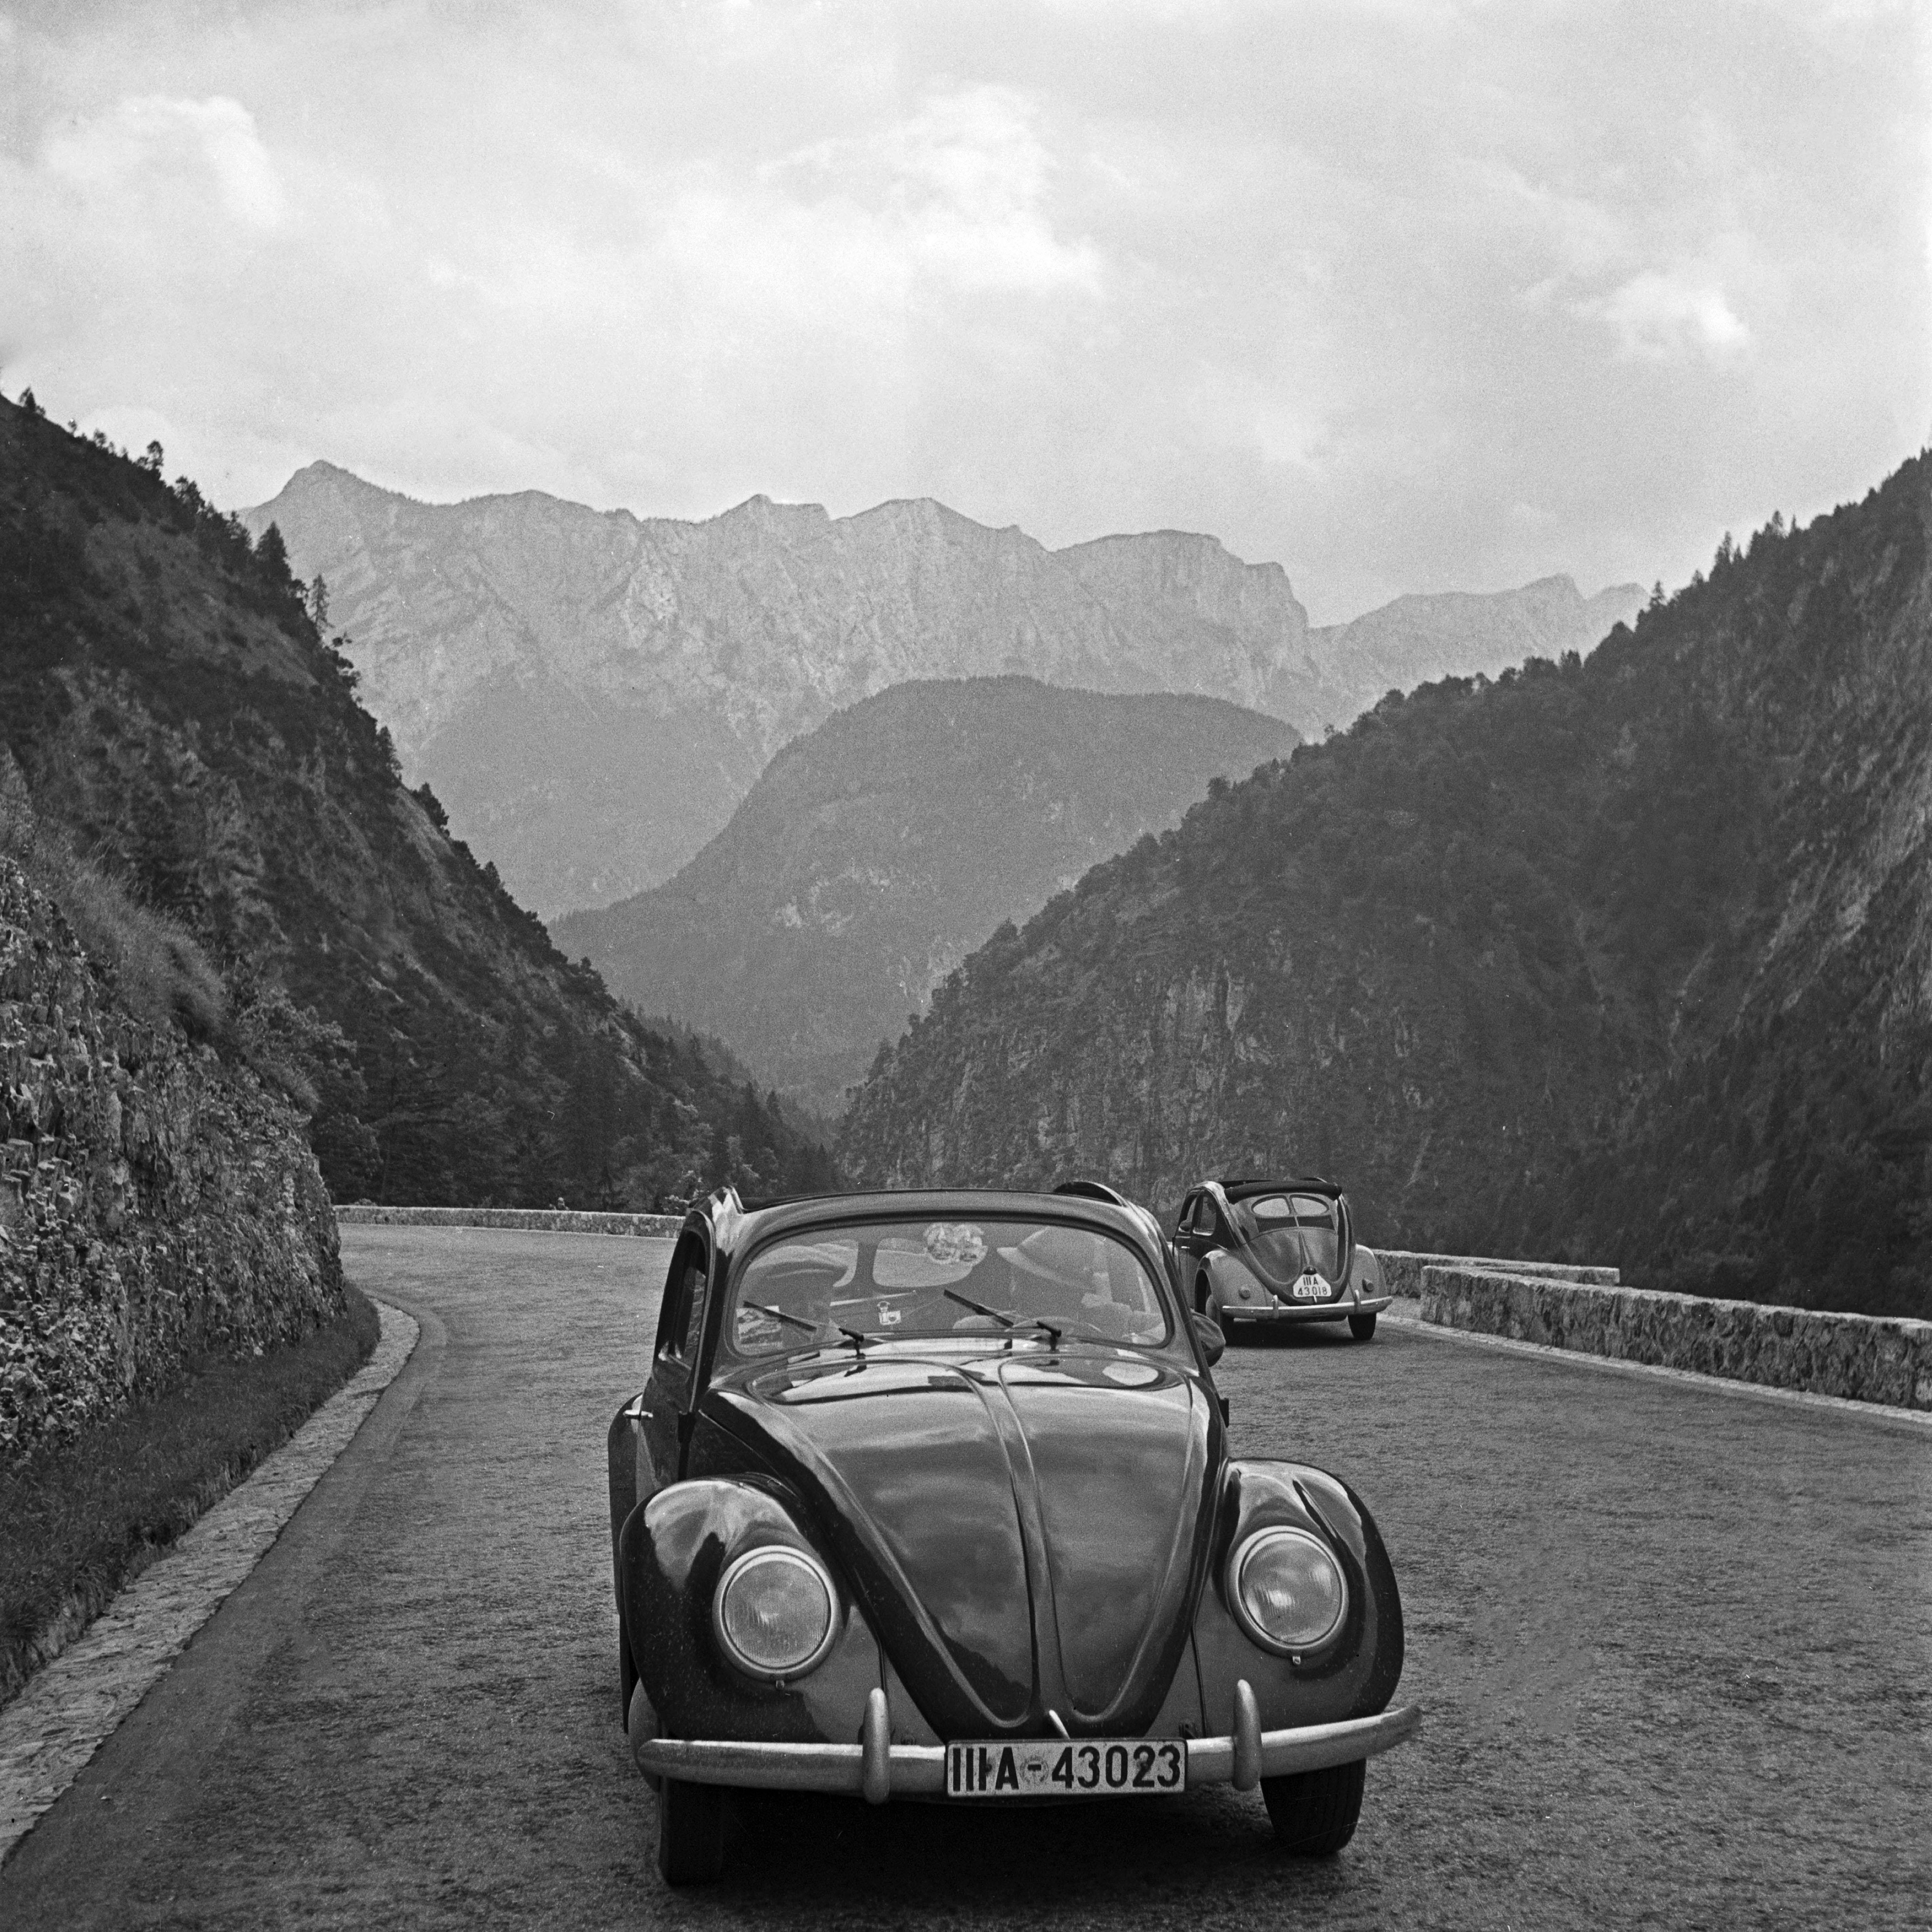 Karl Heinrich Lämmel Black and White Photograph - Travelling by Volkswagen beetle through mountains, Germany 1939 Printed Later 